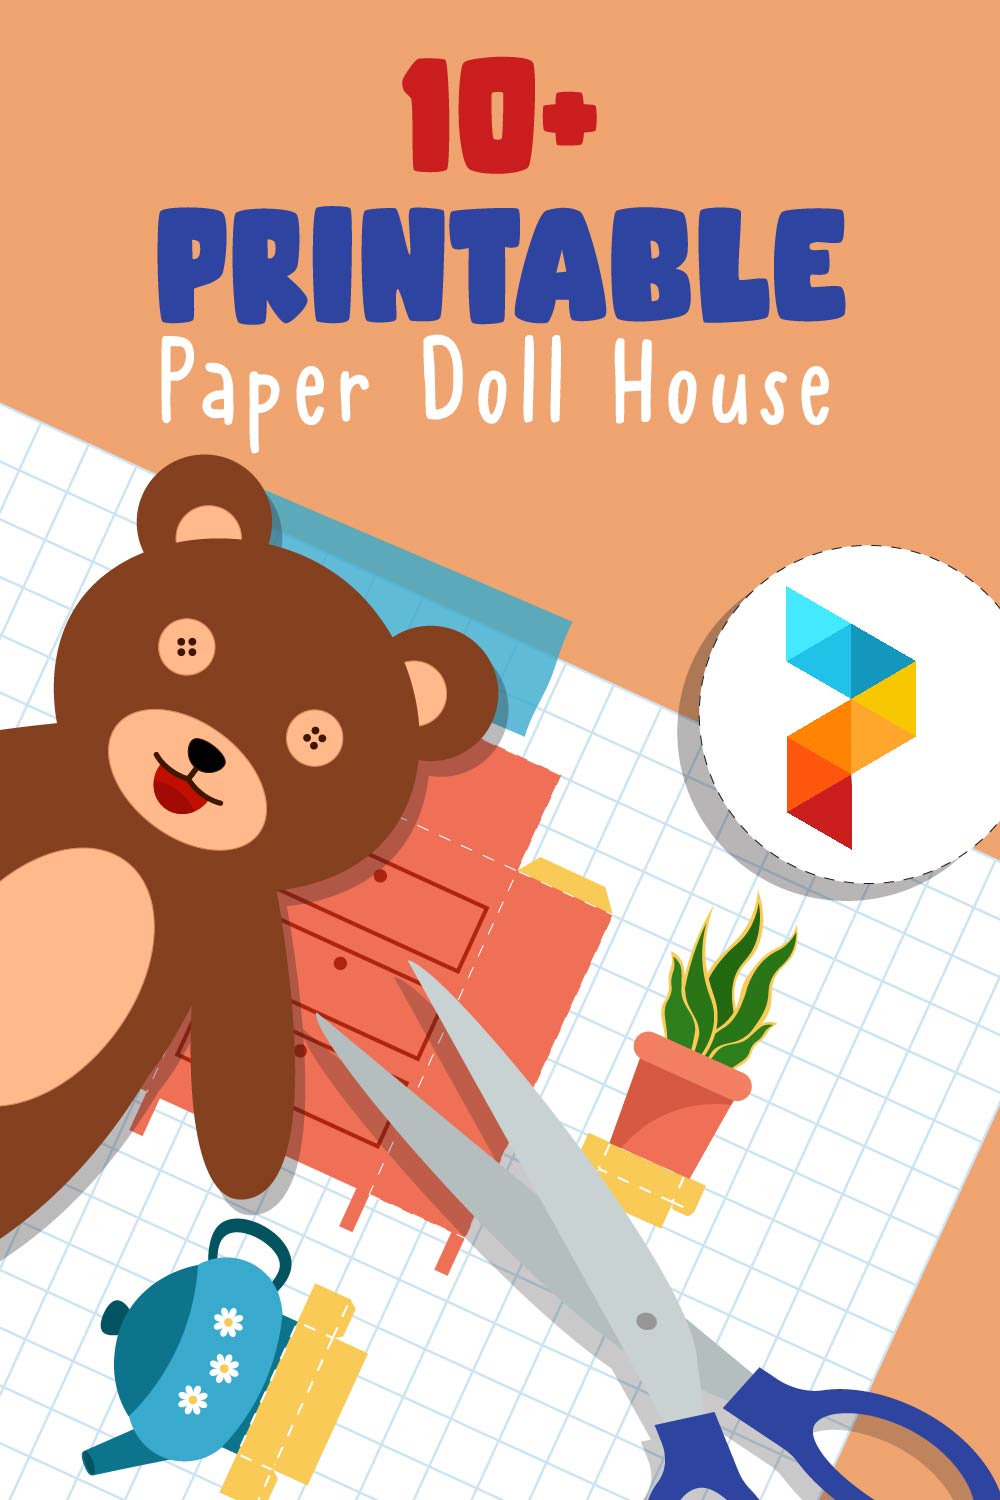 Printable Paper Doll House